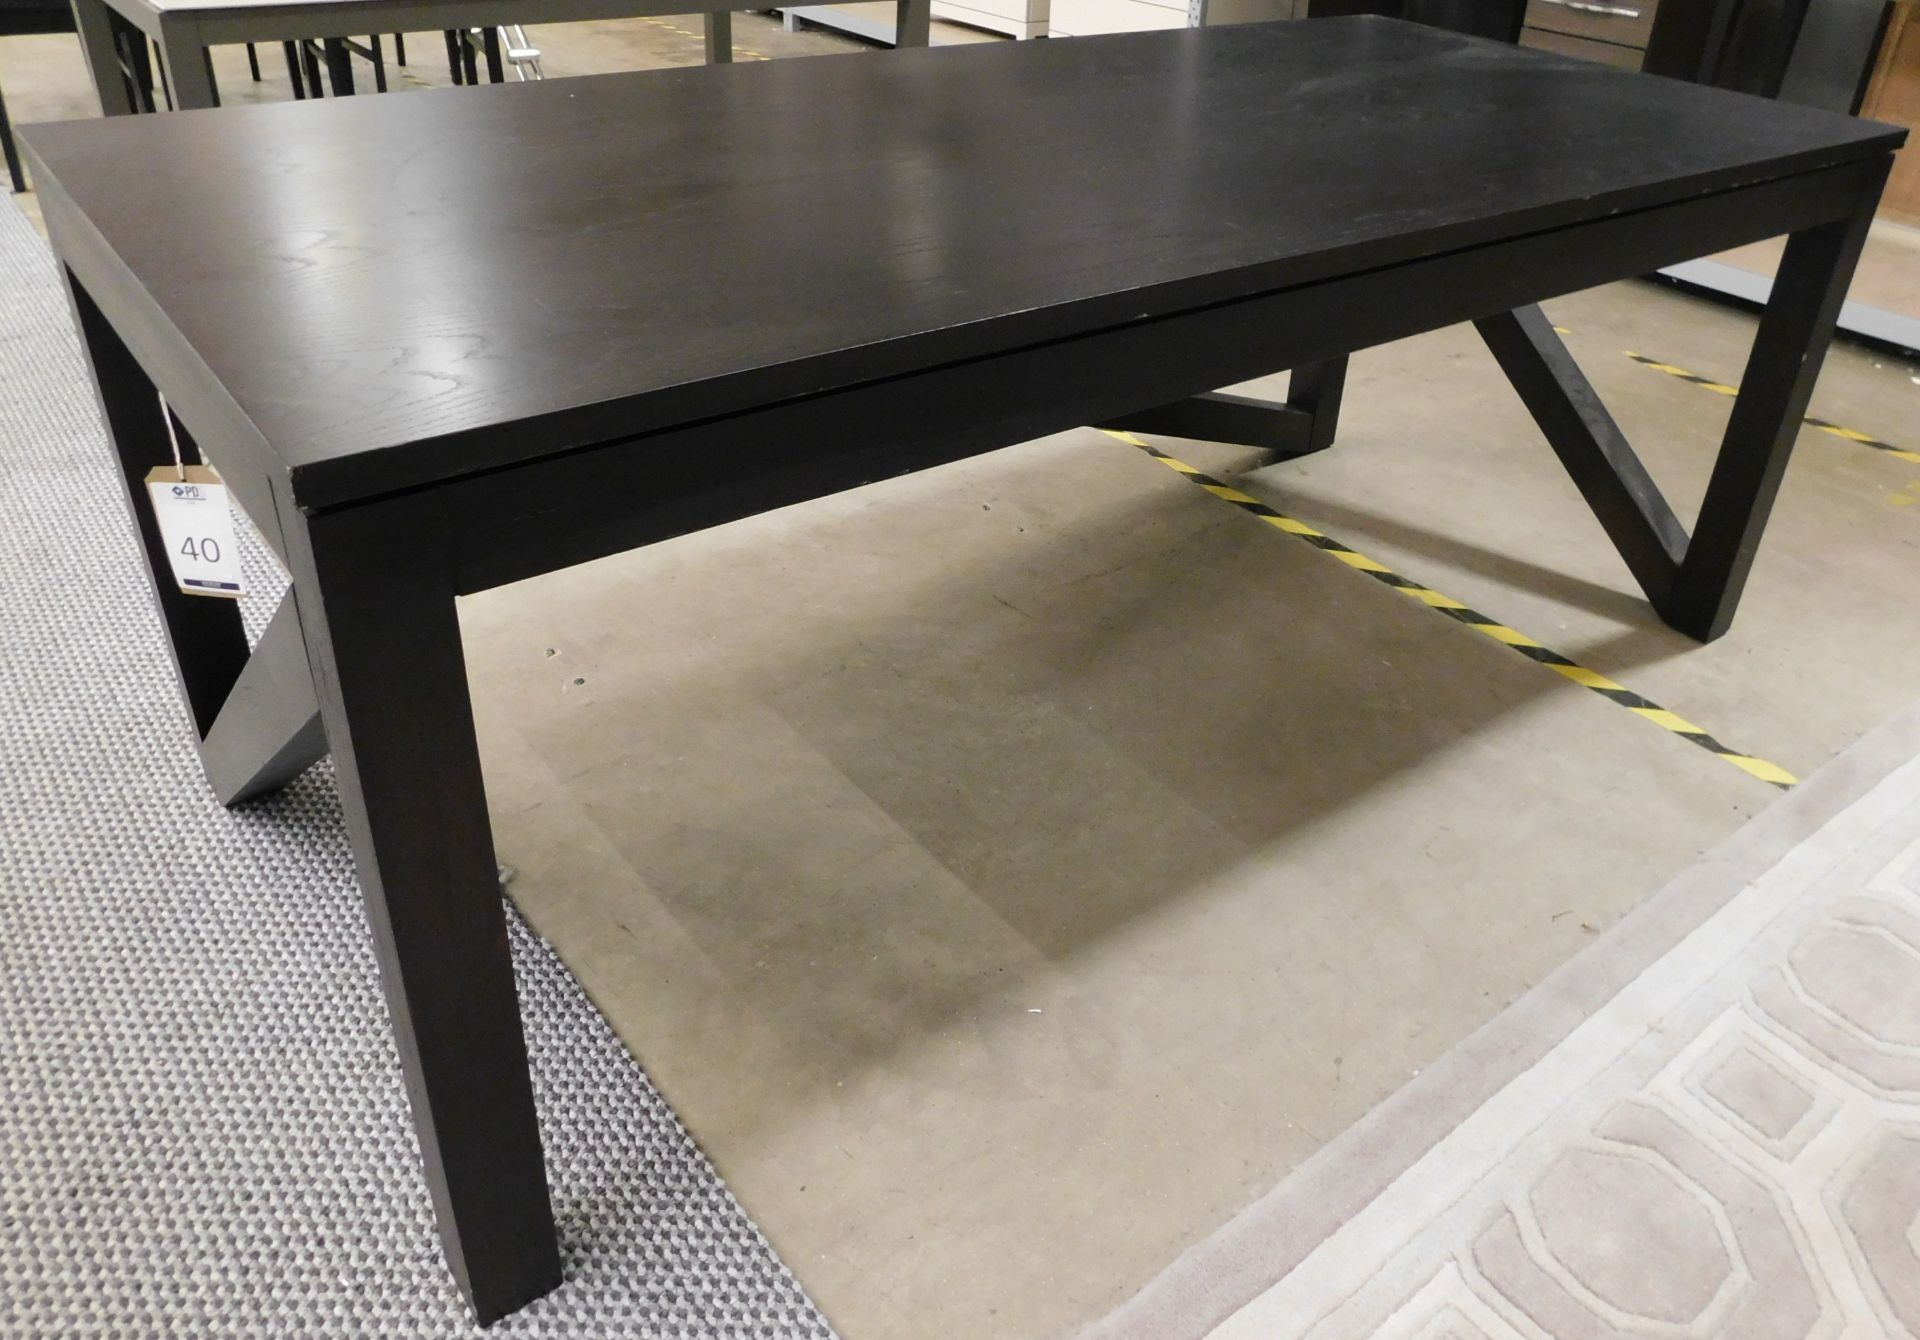 Michael Northcroft Bespoke Desk Table (Scratched) (Approximate Retail £2,000) (6ft 8in Long) - Image 2 of 2